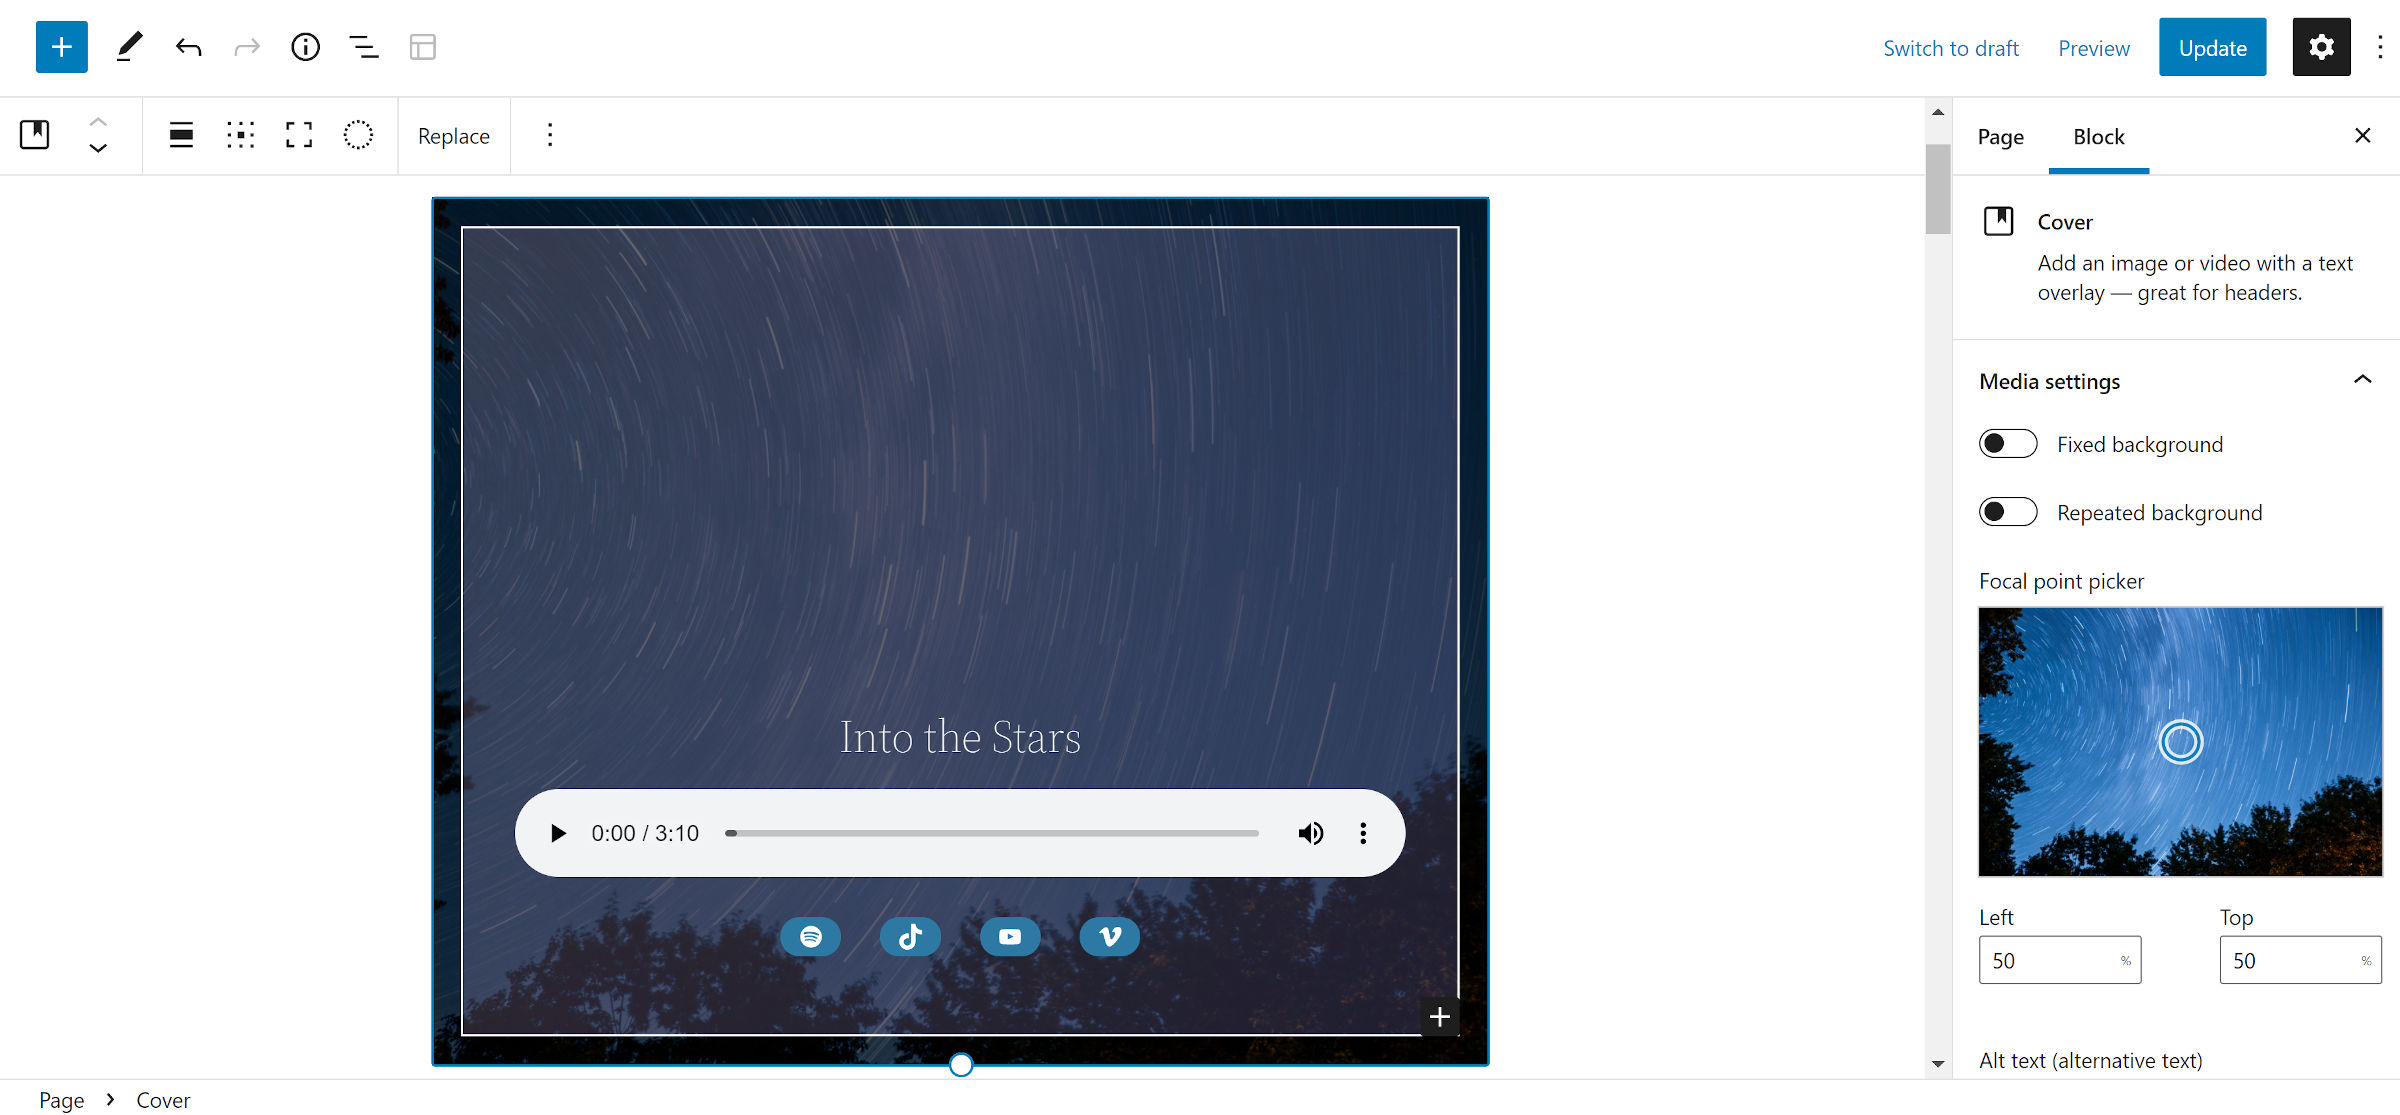 Audio block pattern with a cover background of the night sky.  Social links are below the audio player.